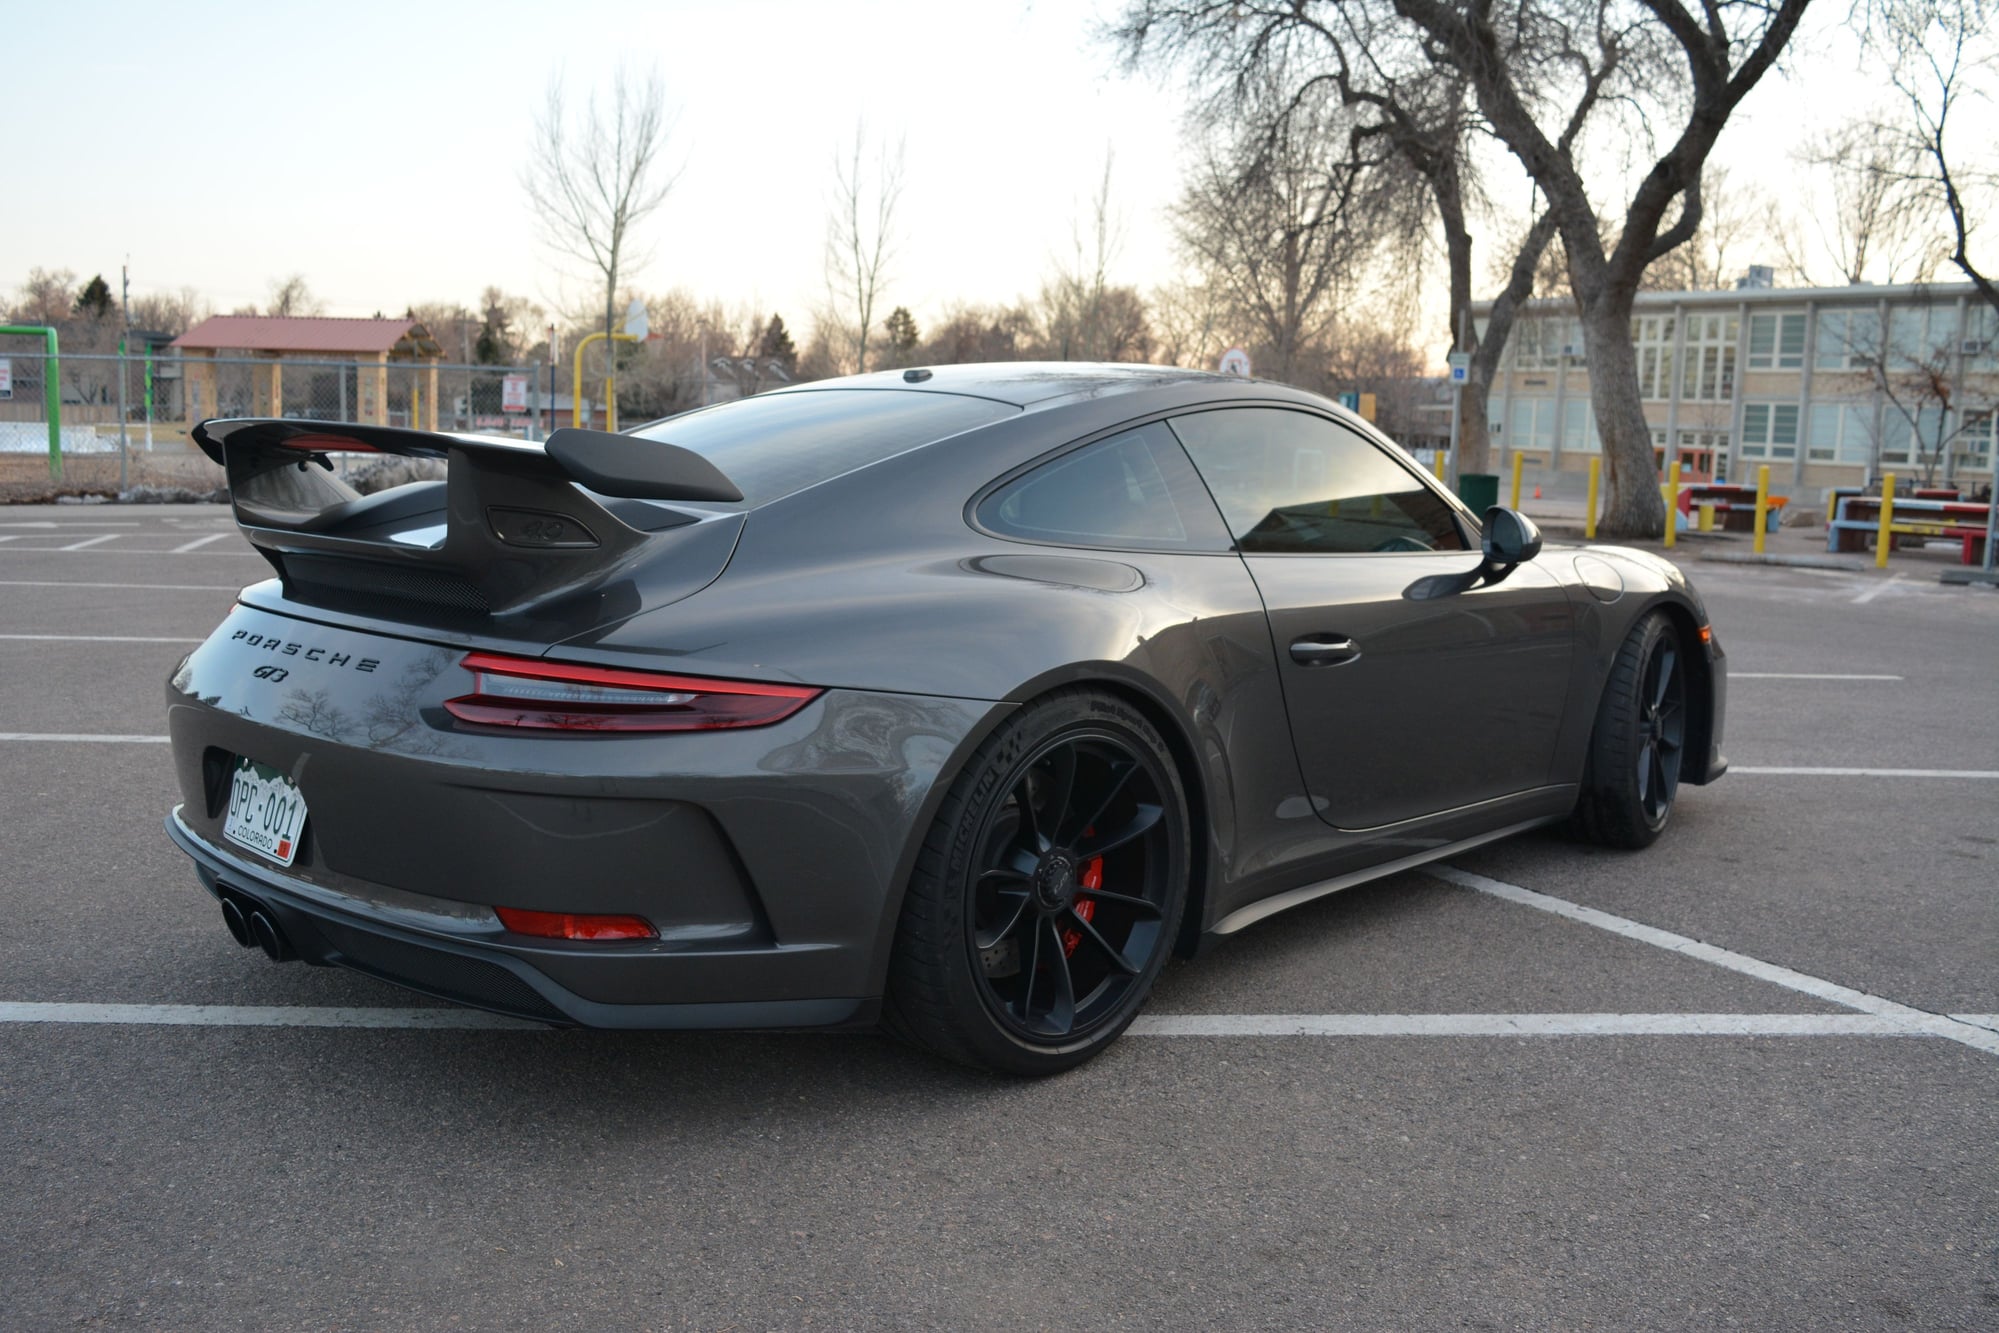 2018 Porsche GT3 - 2018 991.2 GT3 agate gray metallic MT / $152,500 - Used - VIN WP0AC2A93JS175191 - 3,393 Miles - 6 cyl - 2WD - Manual - Coupe - Gray - Denver, CO 80210, United States